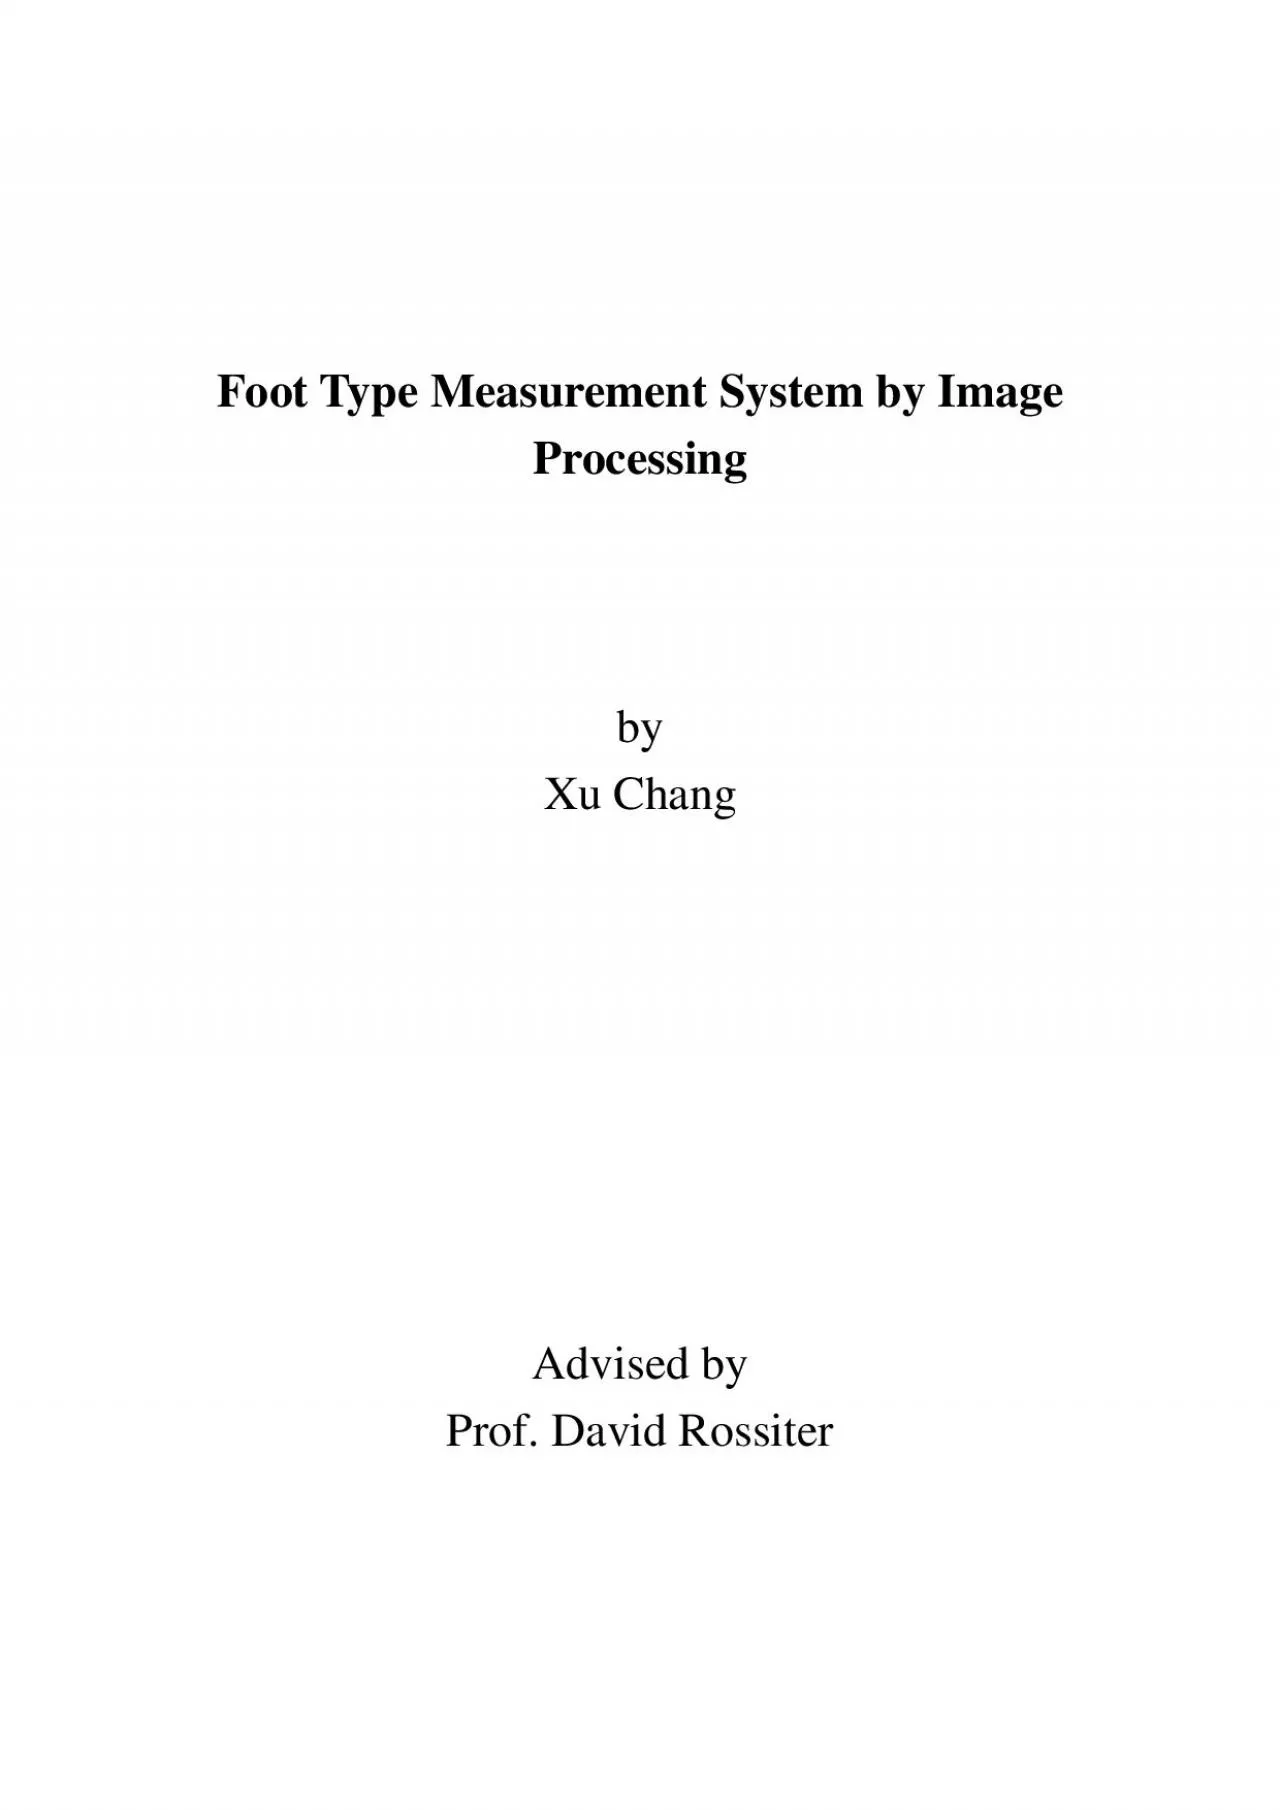 Foot Type Measurement System by Image